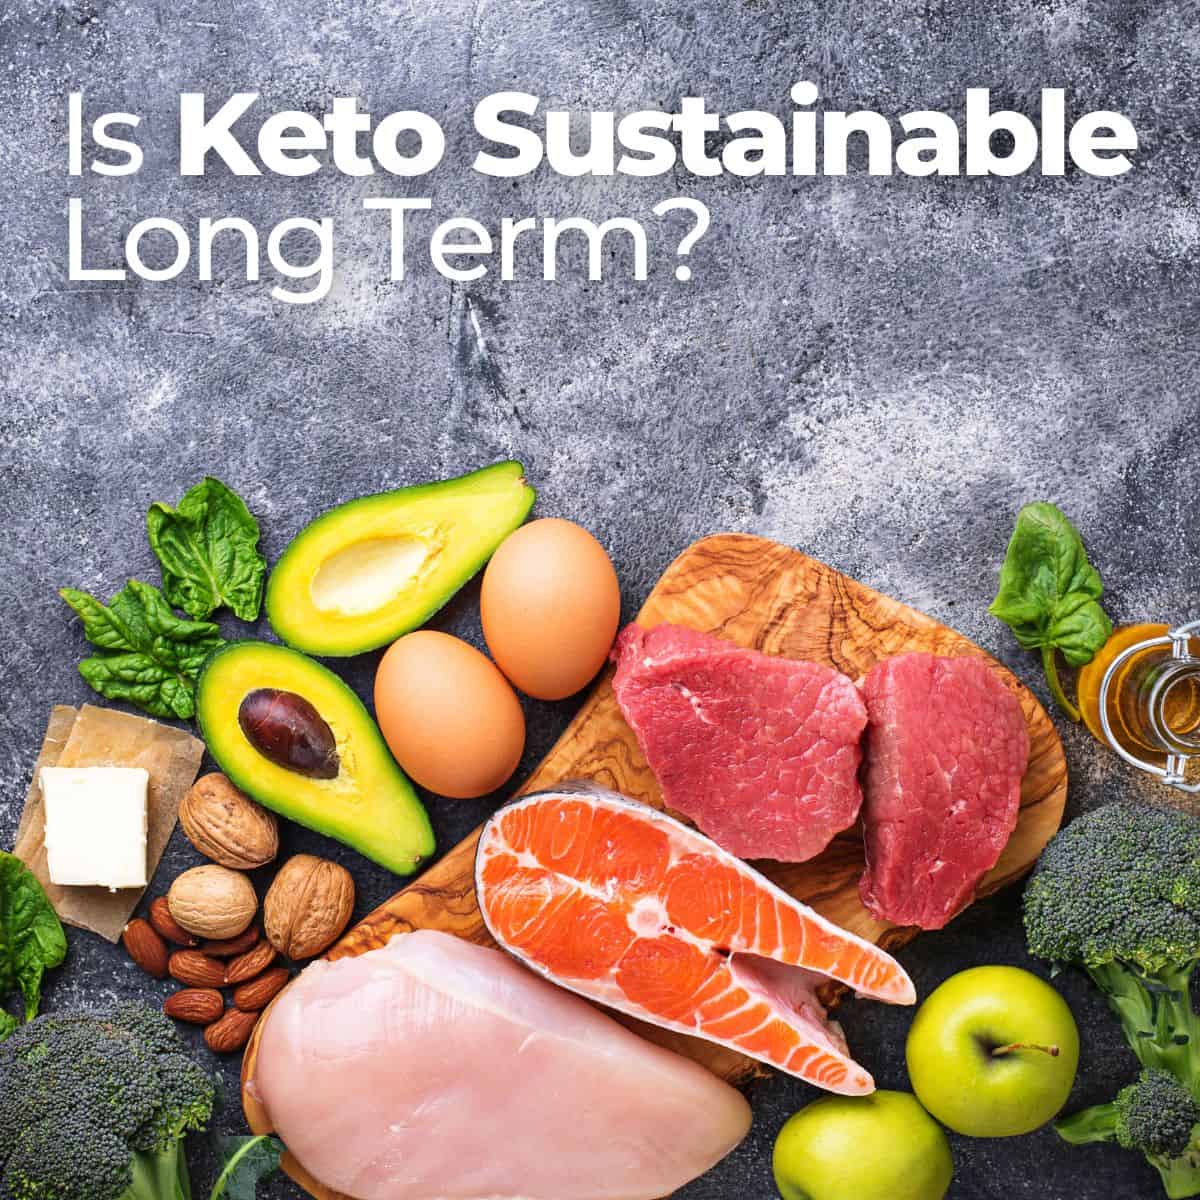 Is keto sustainable long term